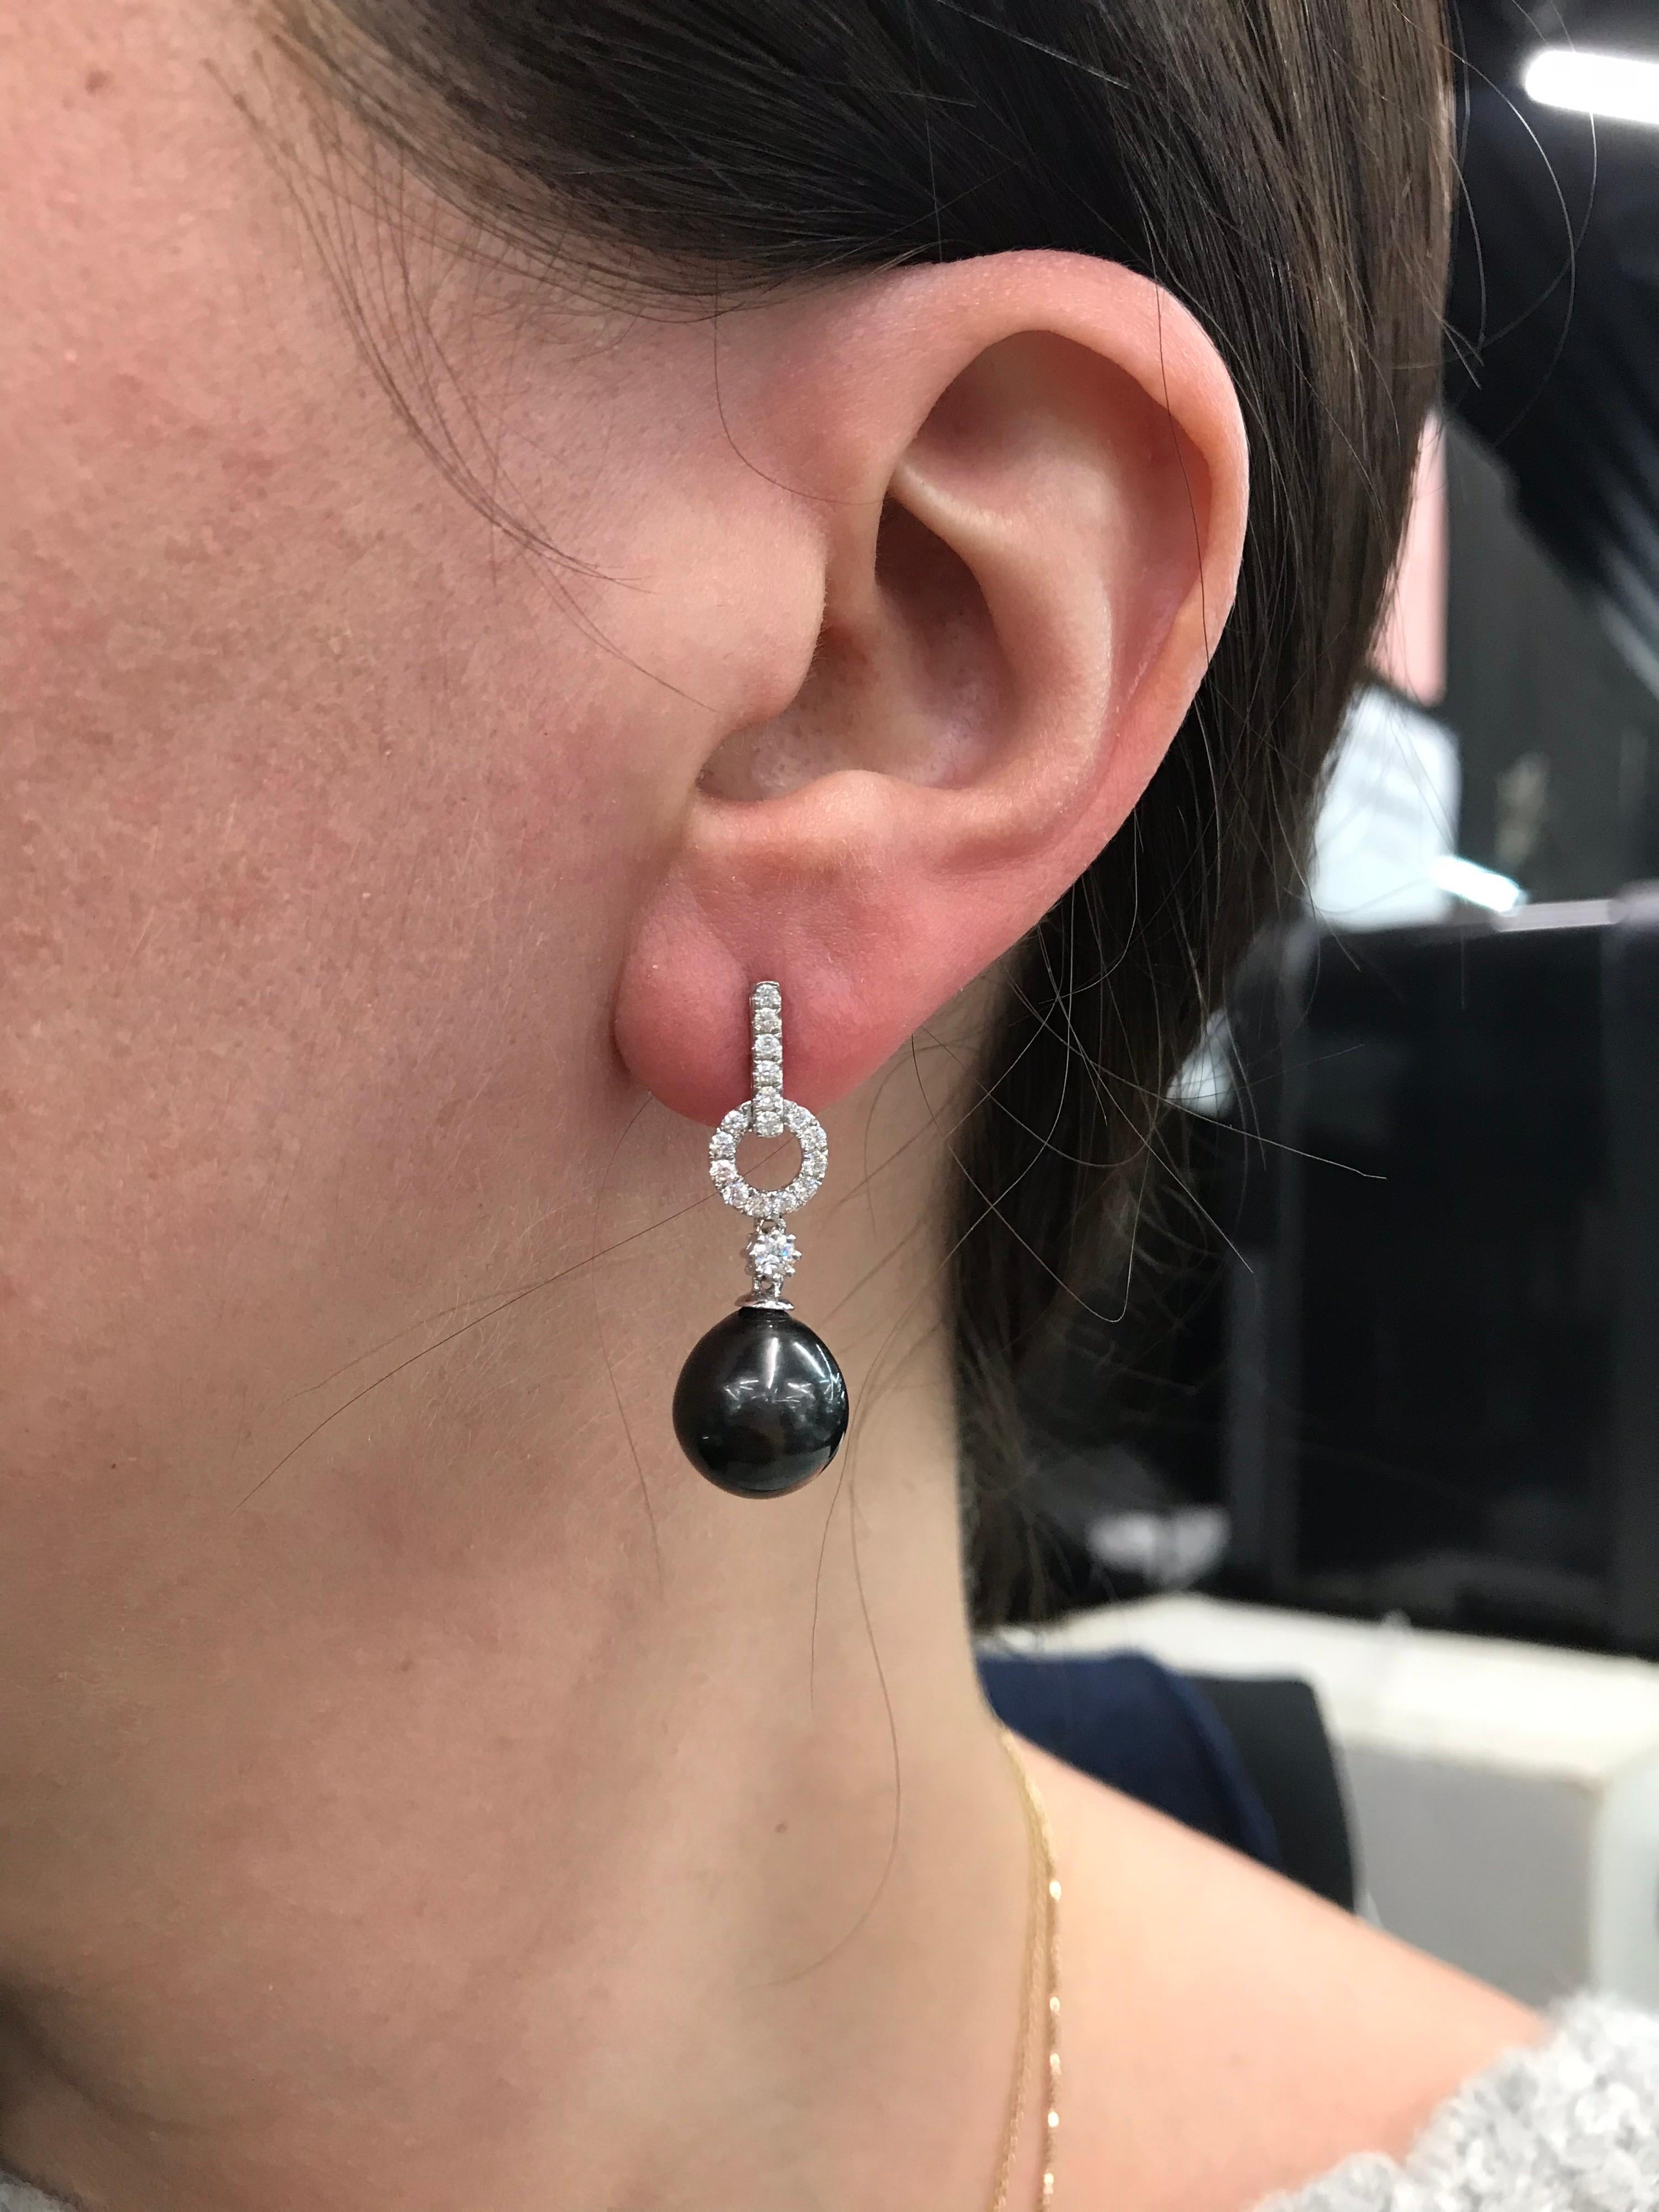 18K White gold drop earrings featuring 32 round brilliants weighing 0.42 carats, two round brilliants drops weighing 0.13 carats and Tahitian pearls measuring 11-12 mm.
Color G-H
Clarity SI

Available in Yellow Gold and can customize to South Sea,